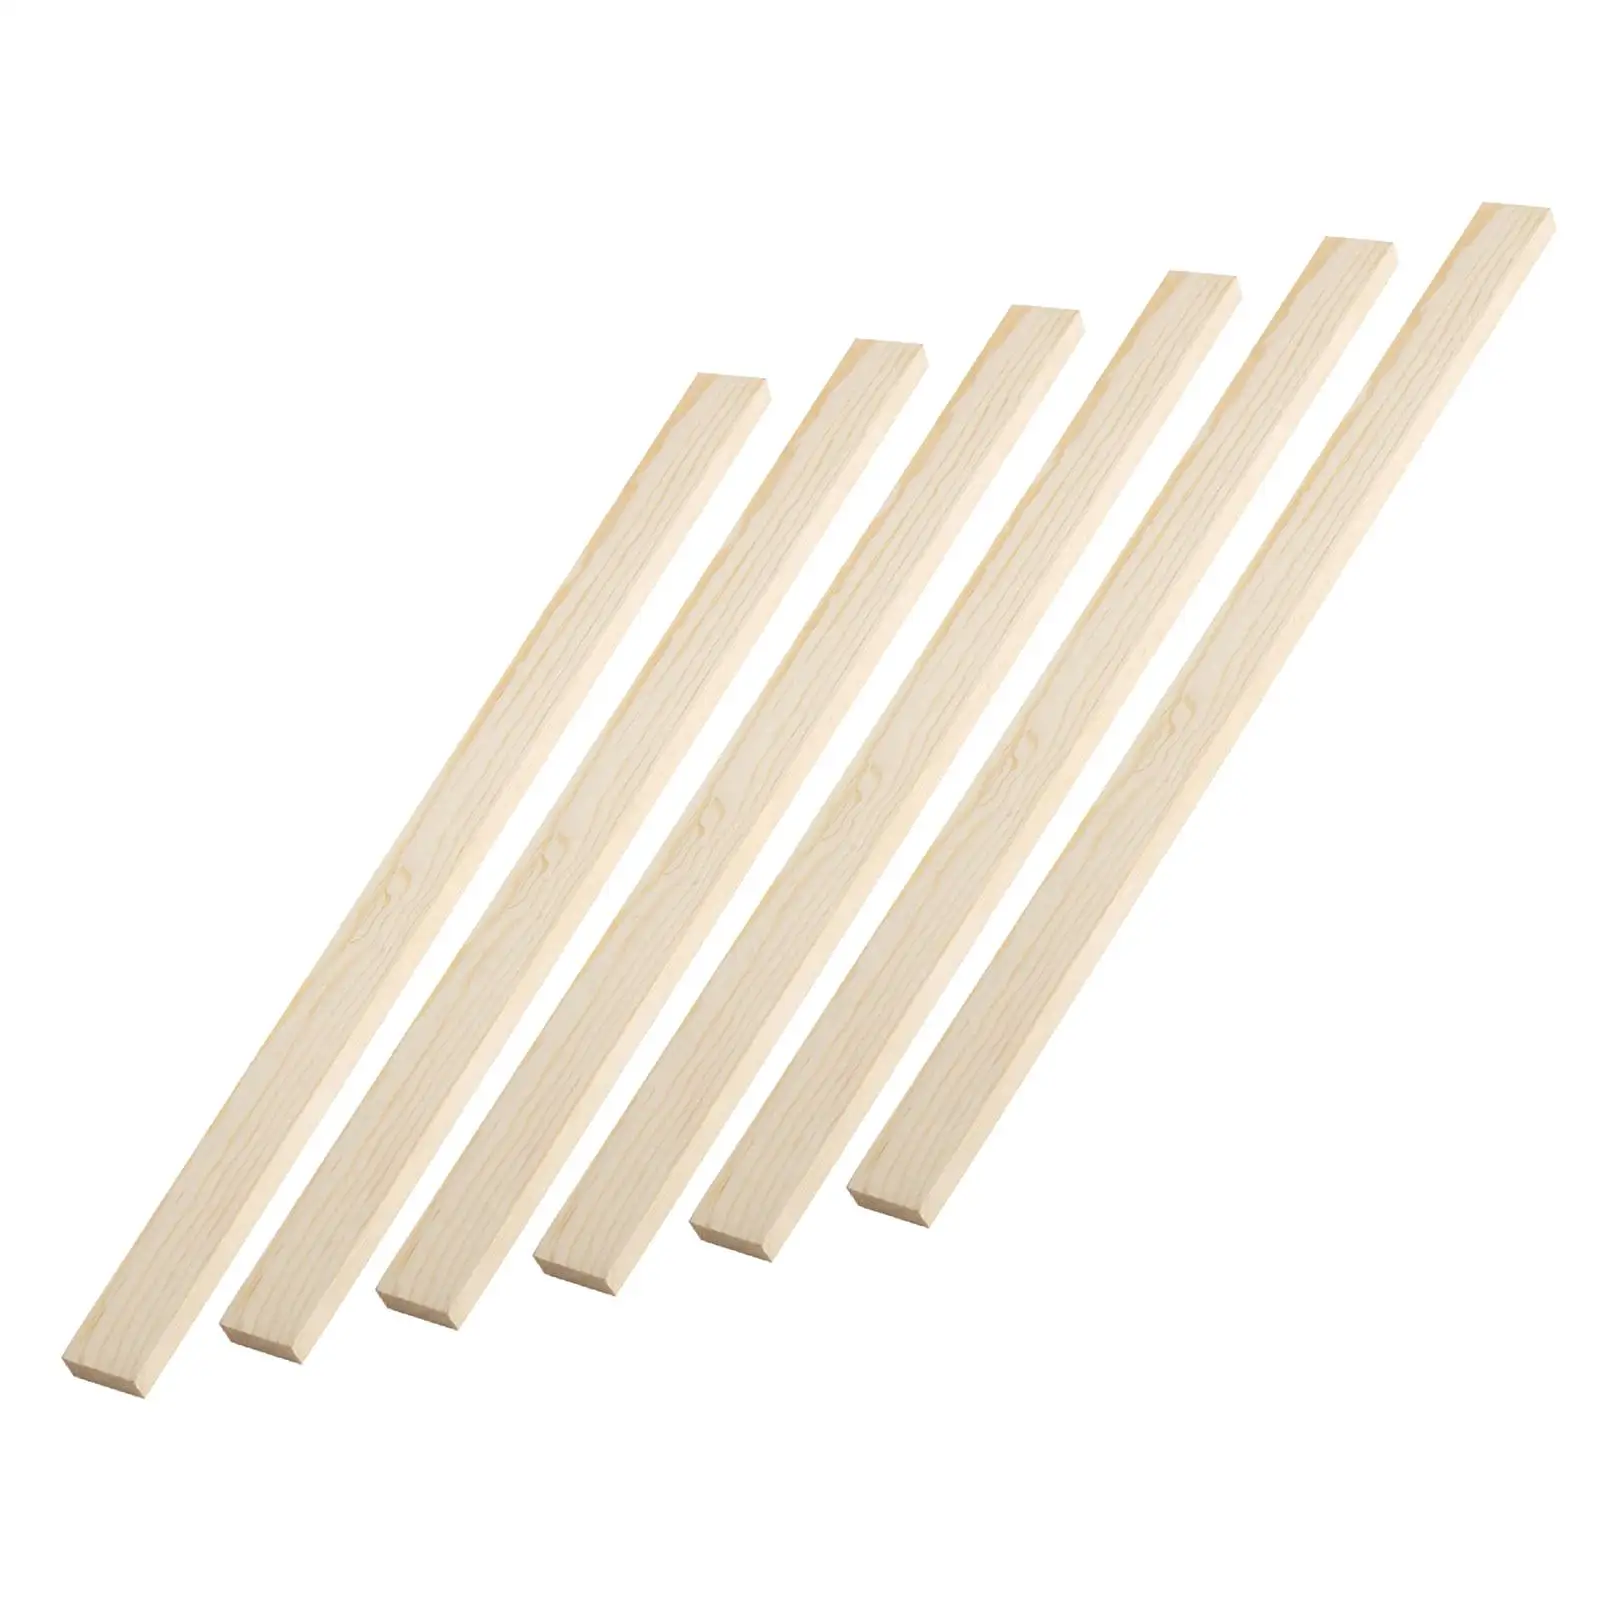 6Pcs Length 40cm Wooden Rolling Pin Guides Measuring Dough Strips for Dough Thickness